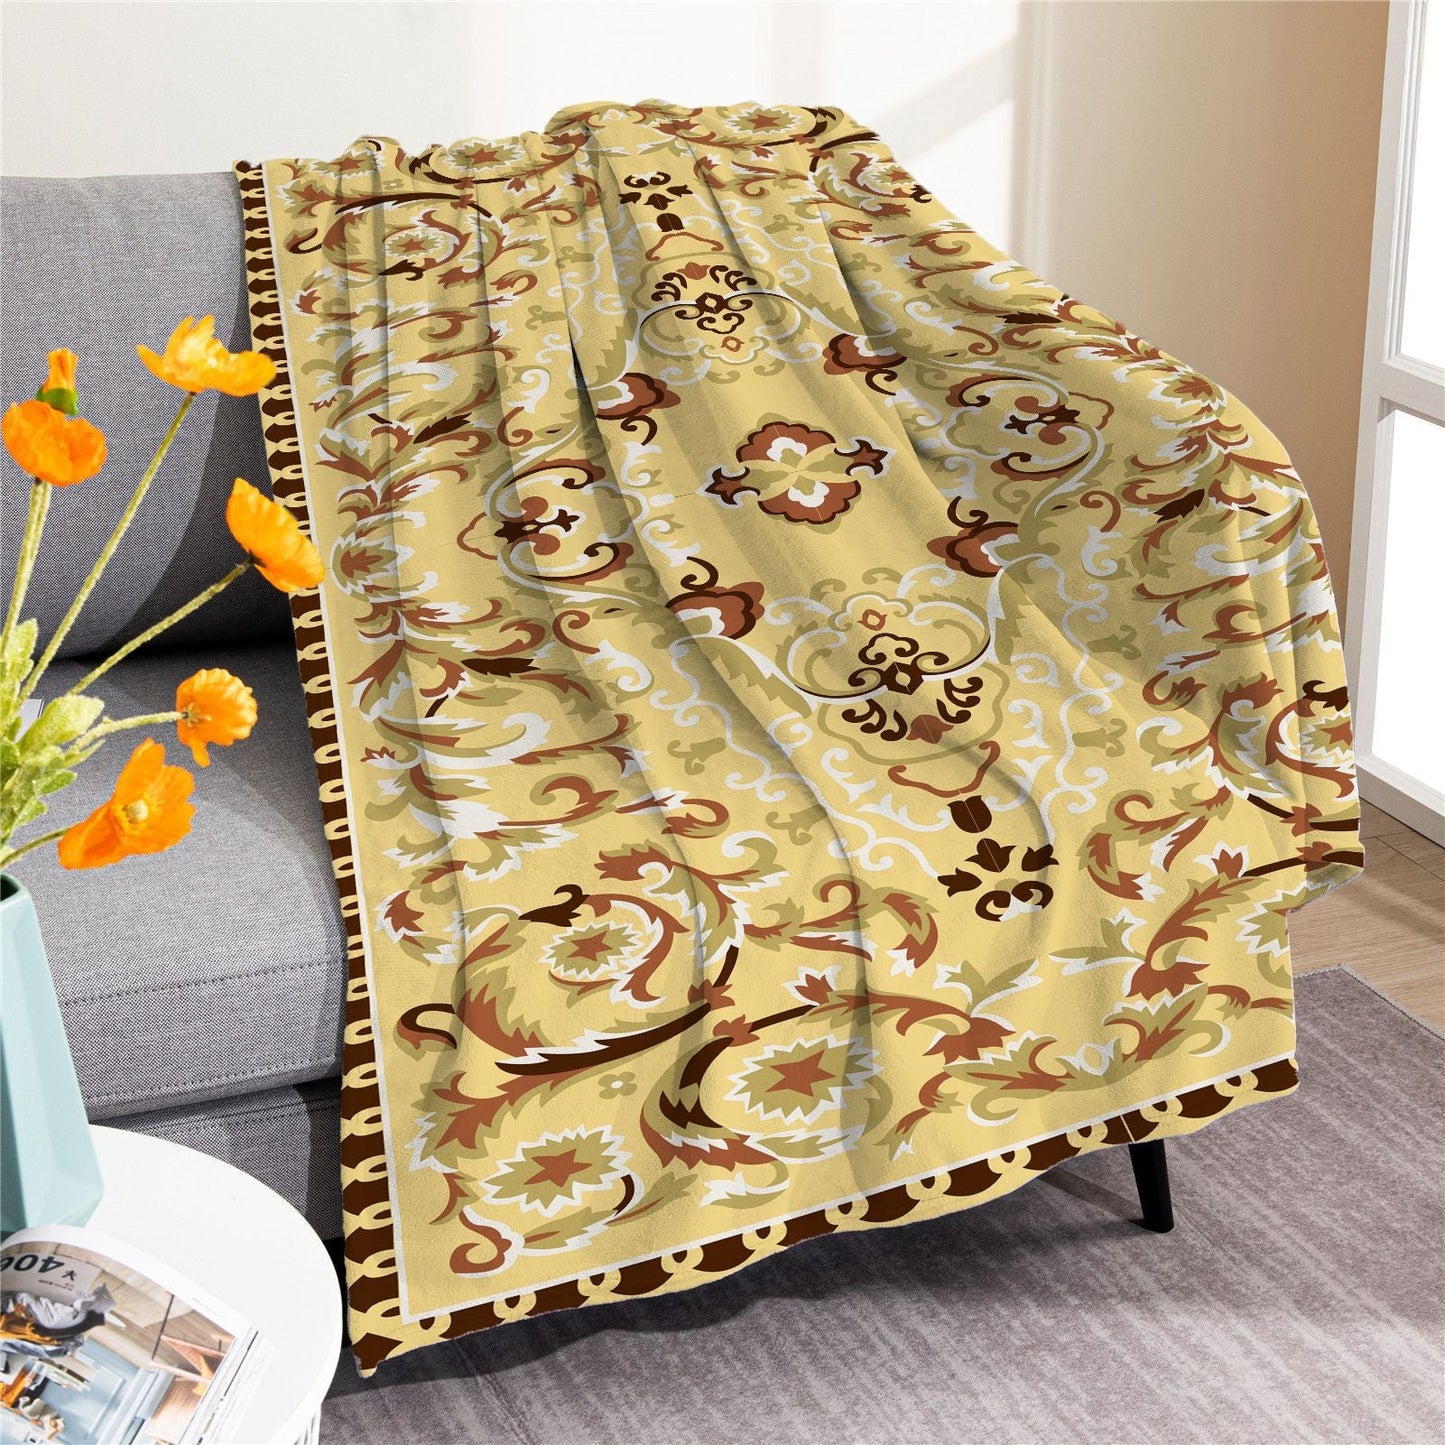 Vintage Boho Fleece Throw Blankets-Blankets-M20220701-18-50*60 Inches-Free Shipping at meselling99